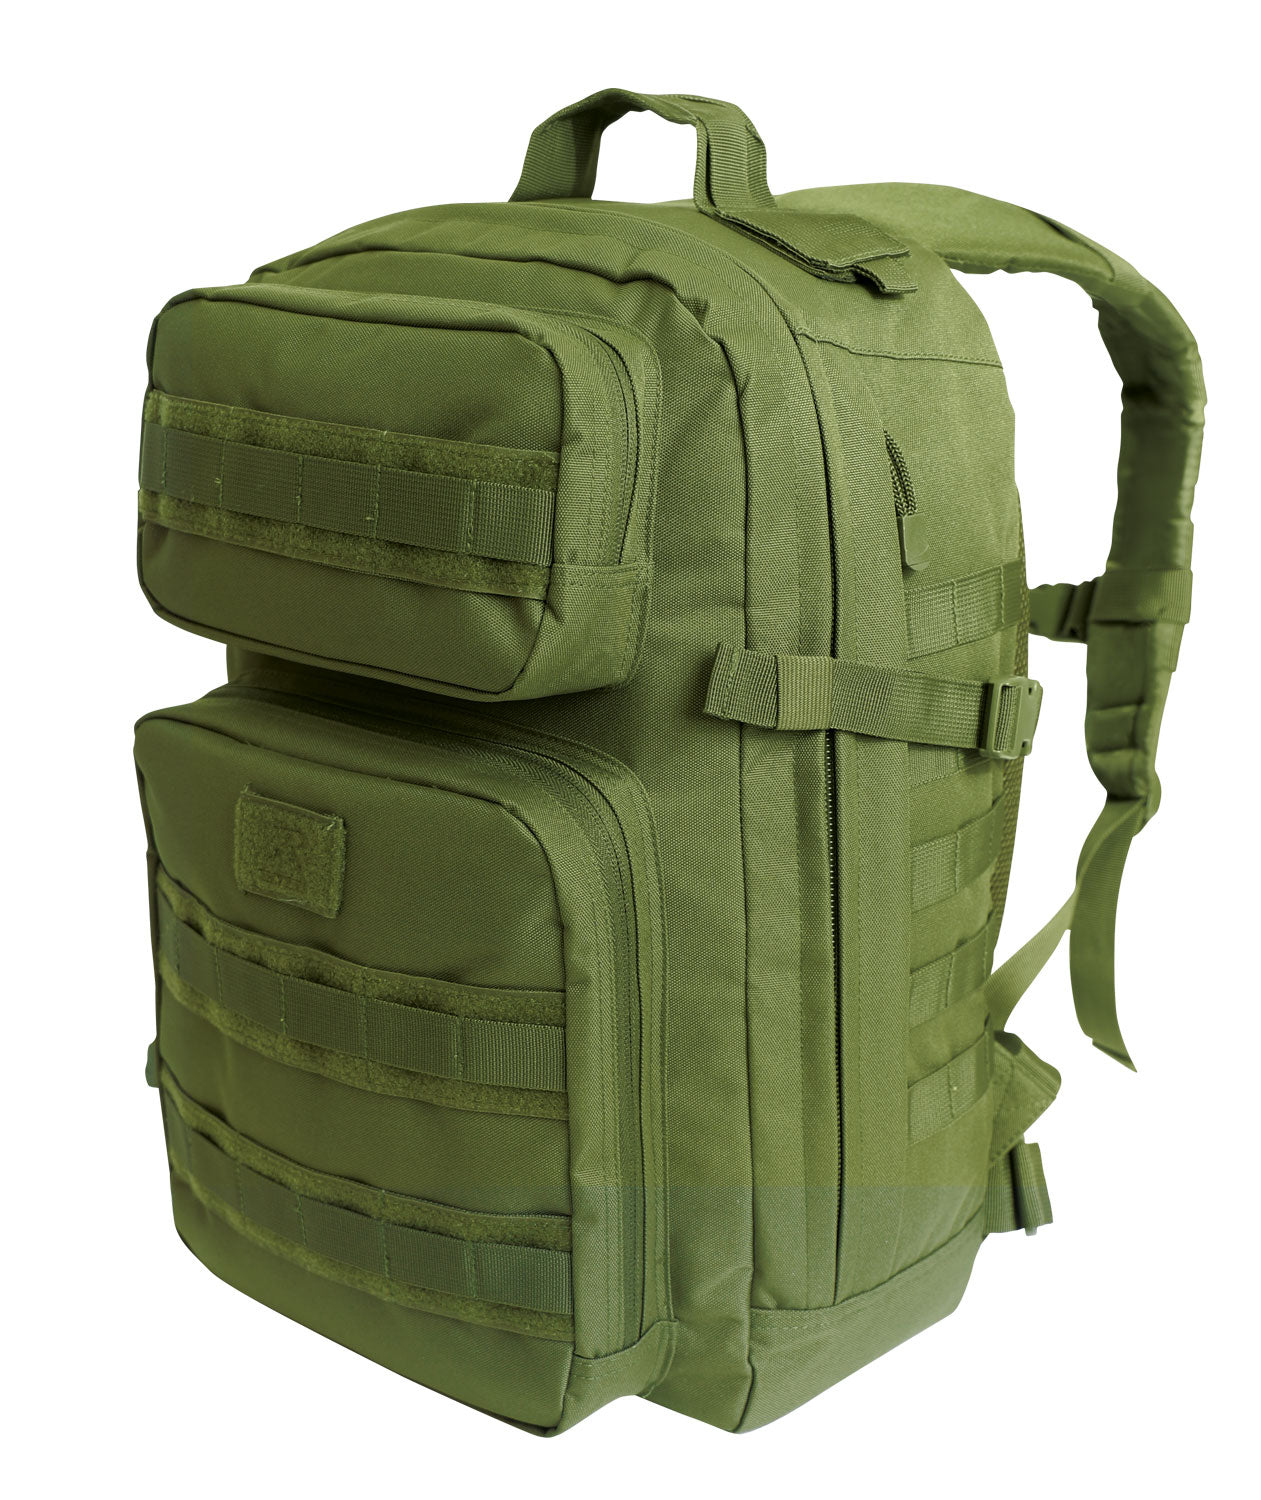 Milspec Fast Mover Tactical Backpack Backpacks & Packs MilTac Tactical Military Outdoor Gear Australia